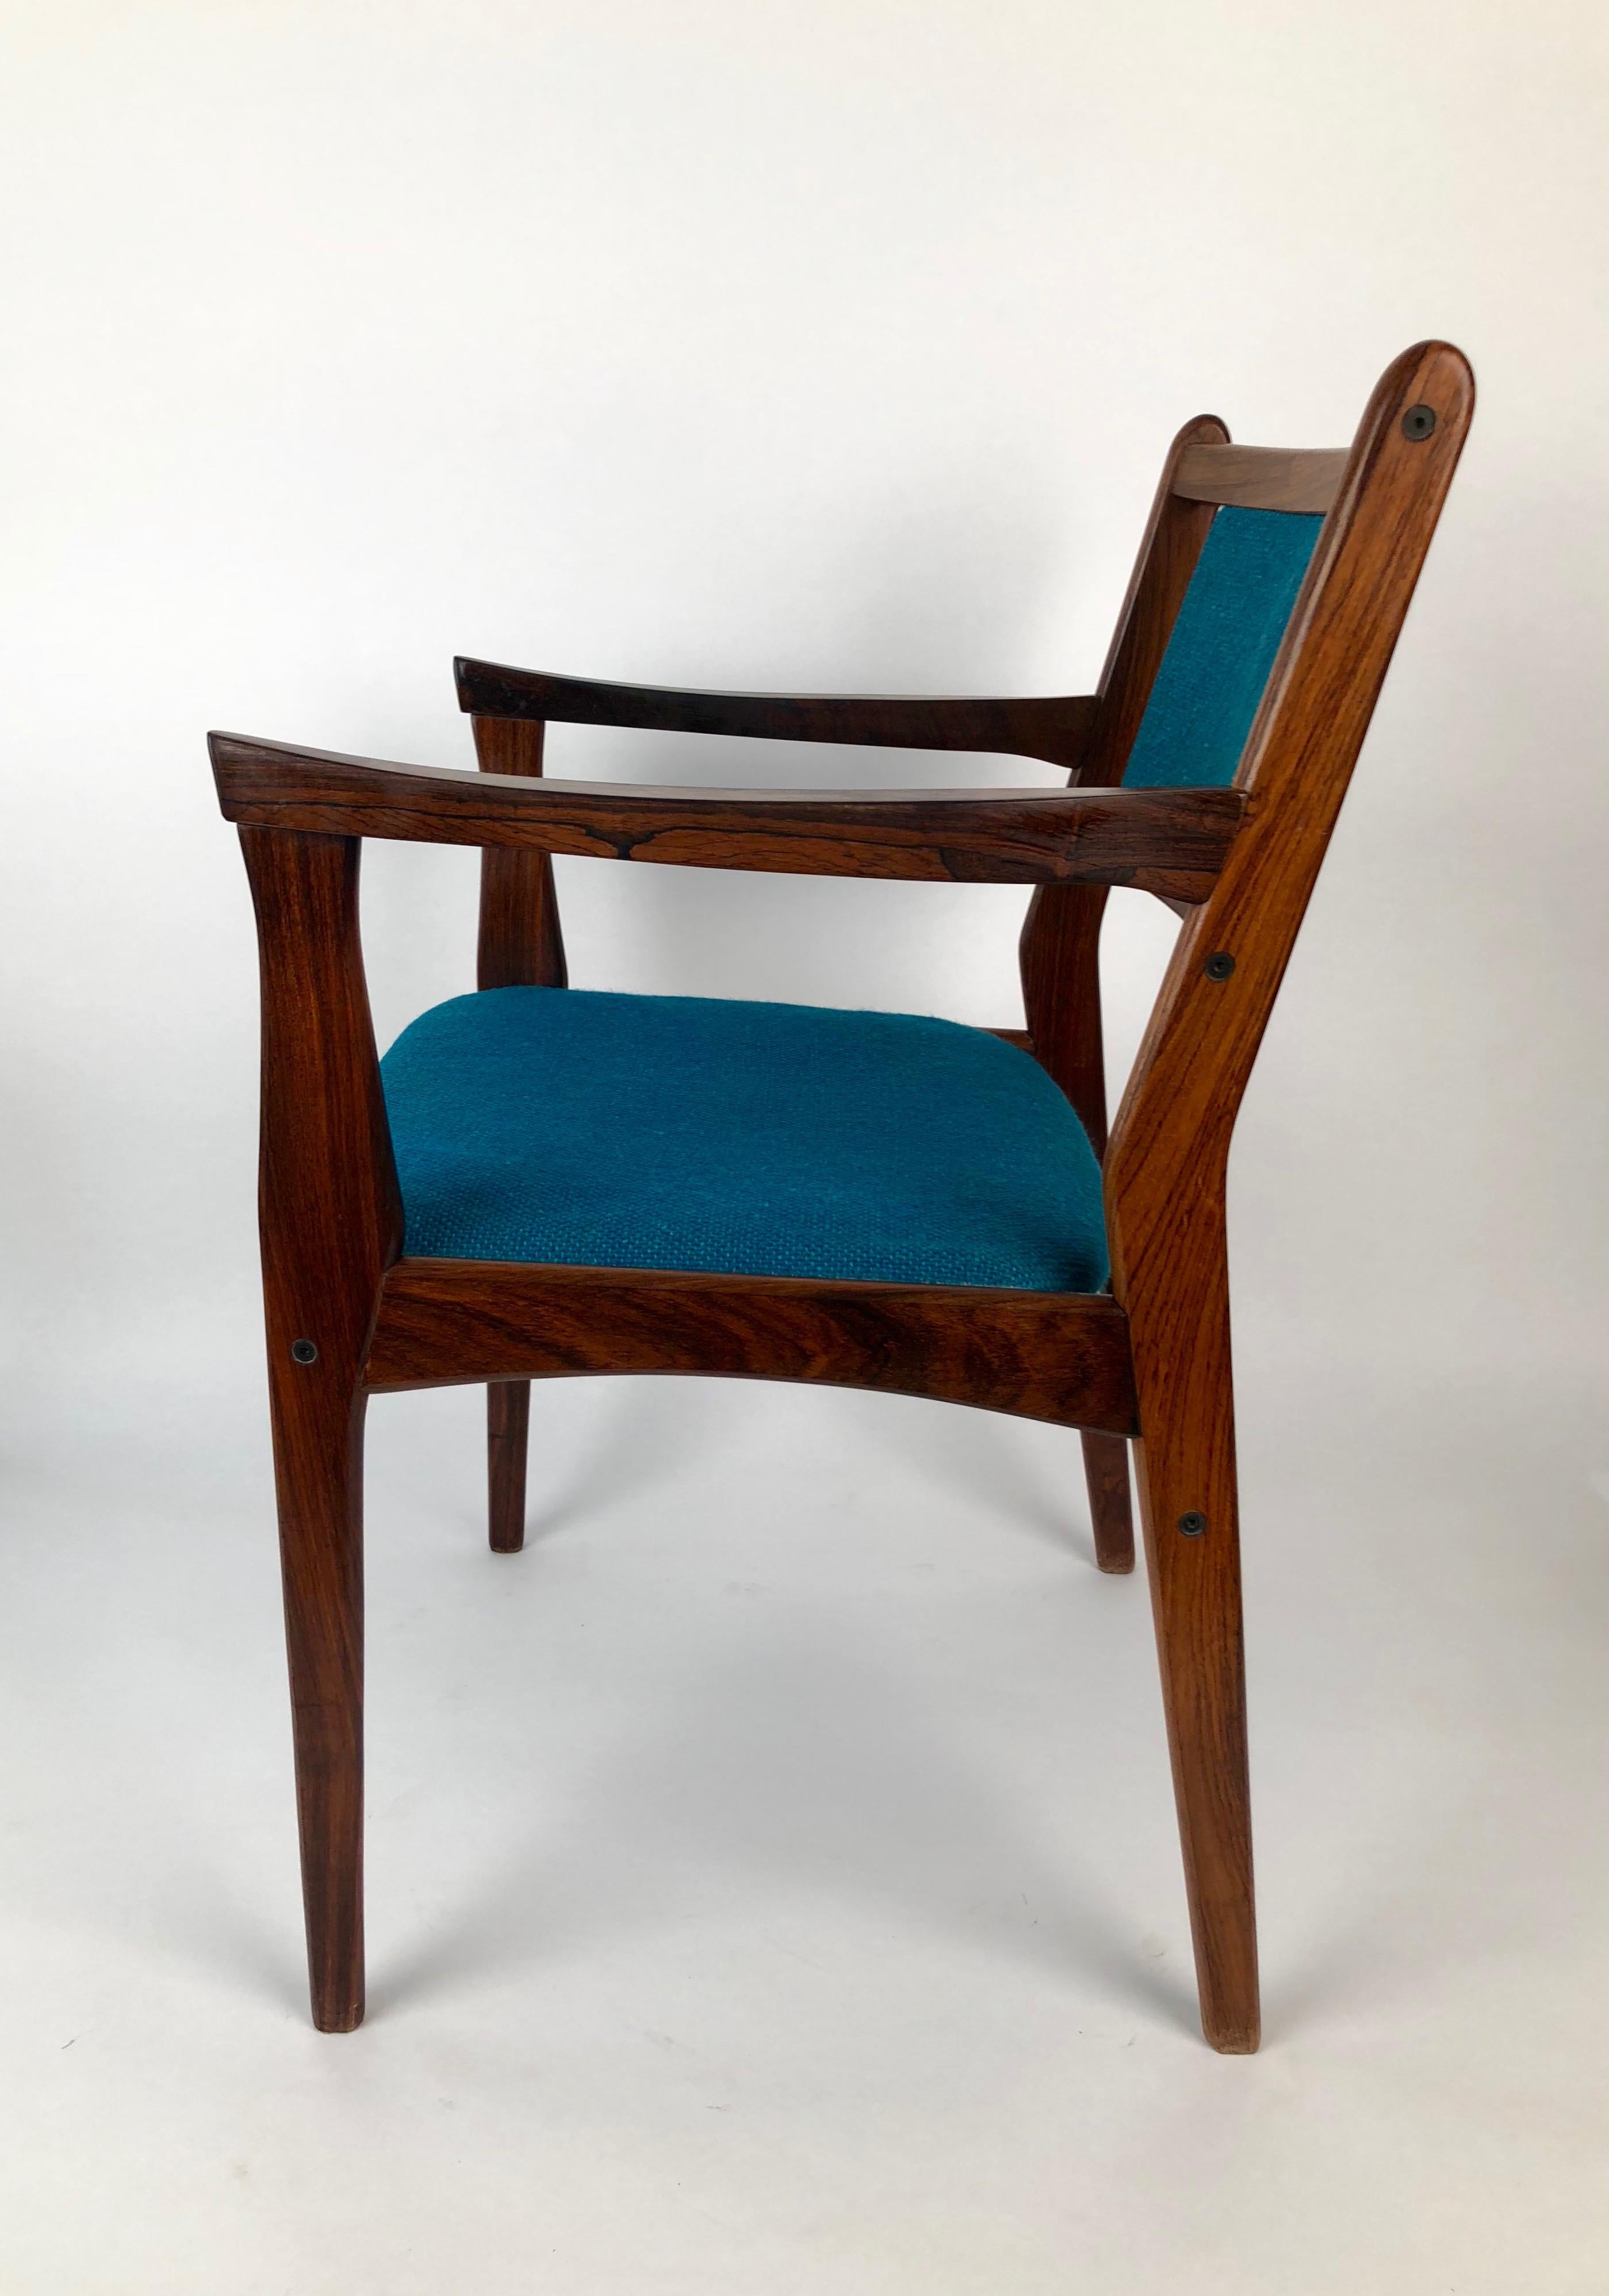 Set of Two Palisander Chairs with Turquoise Fabric from the 1960s For Sale 4